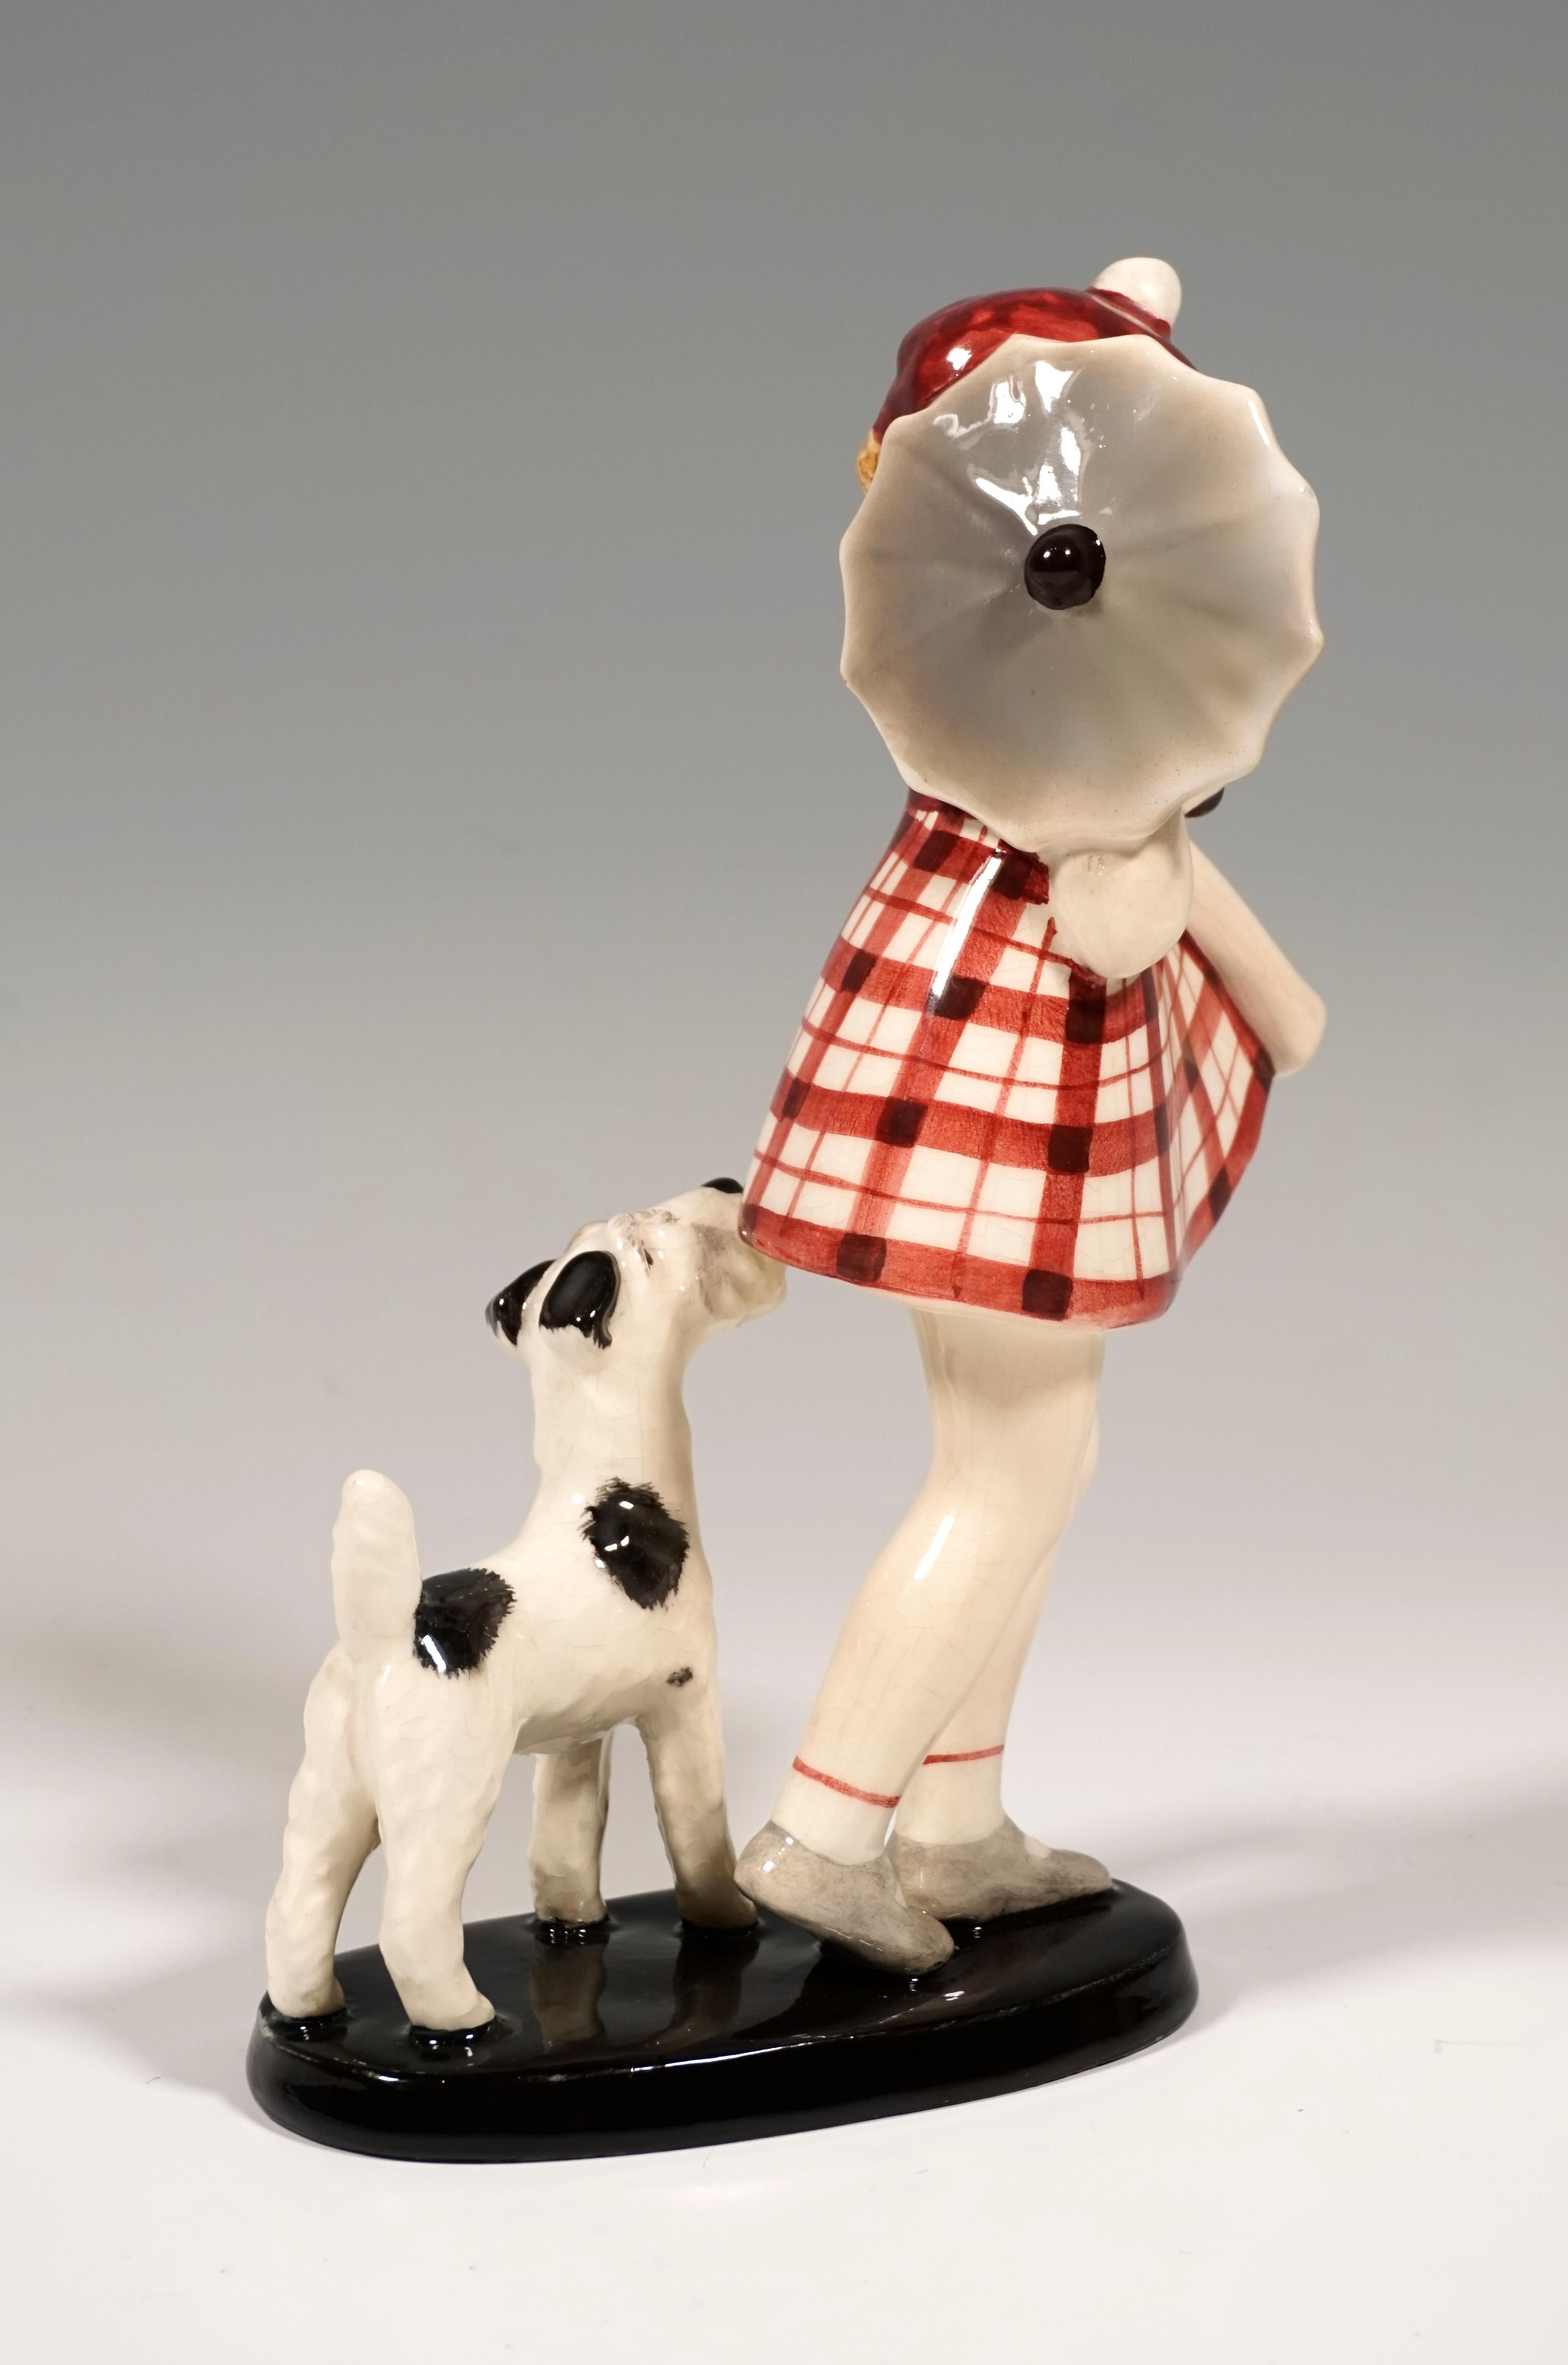 Rare Goldscheider ceramic figurine group of the 1030s:
Little girl in a red checkered dress and with a red cap, holding a small umbrella on her shoulder, anxiously looking over her other shoulder at a small fox terrier behind her.
On a black, oval